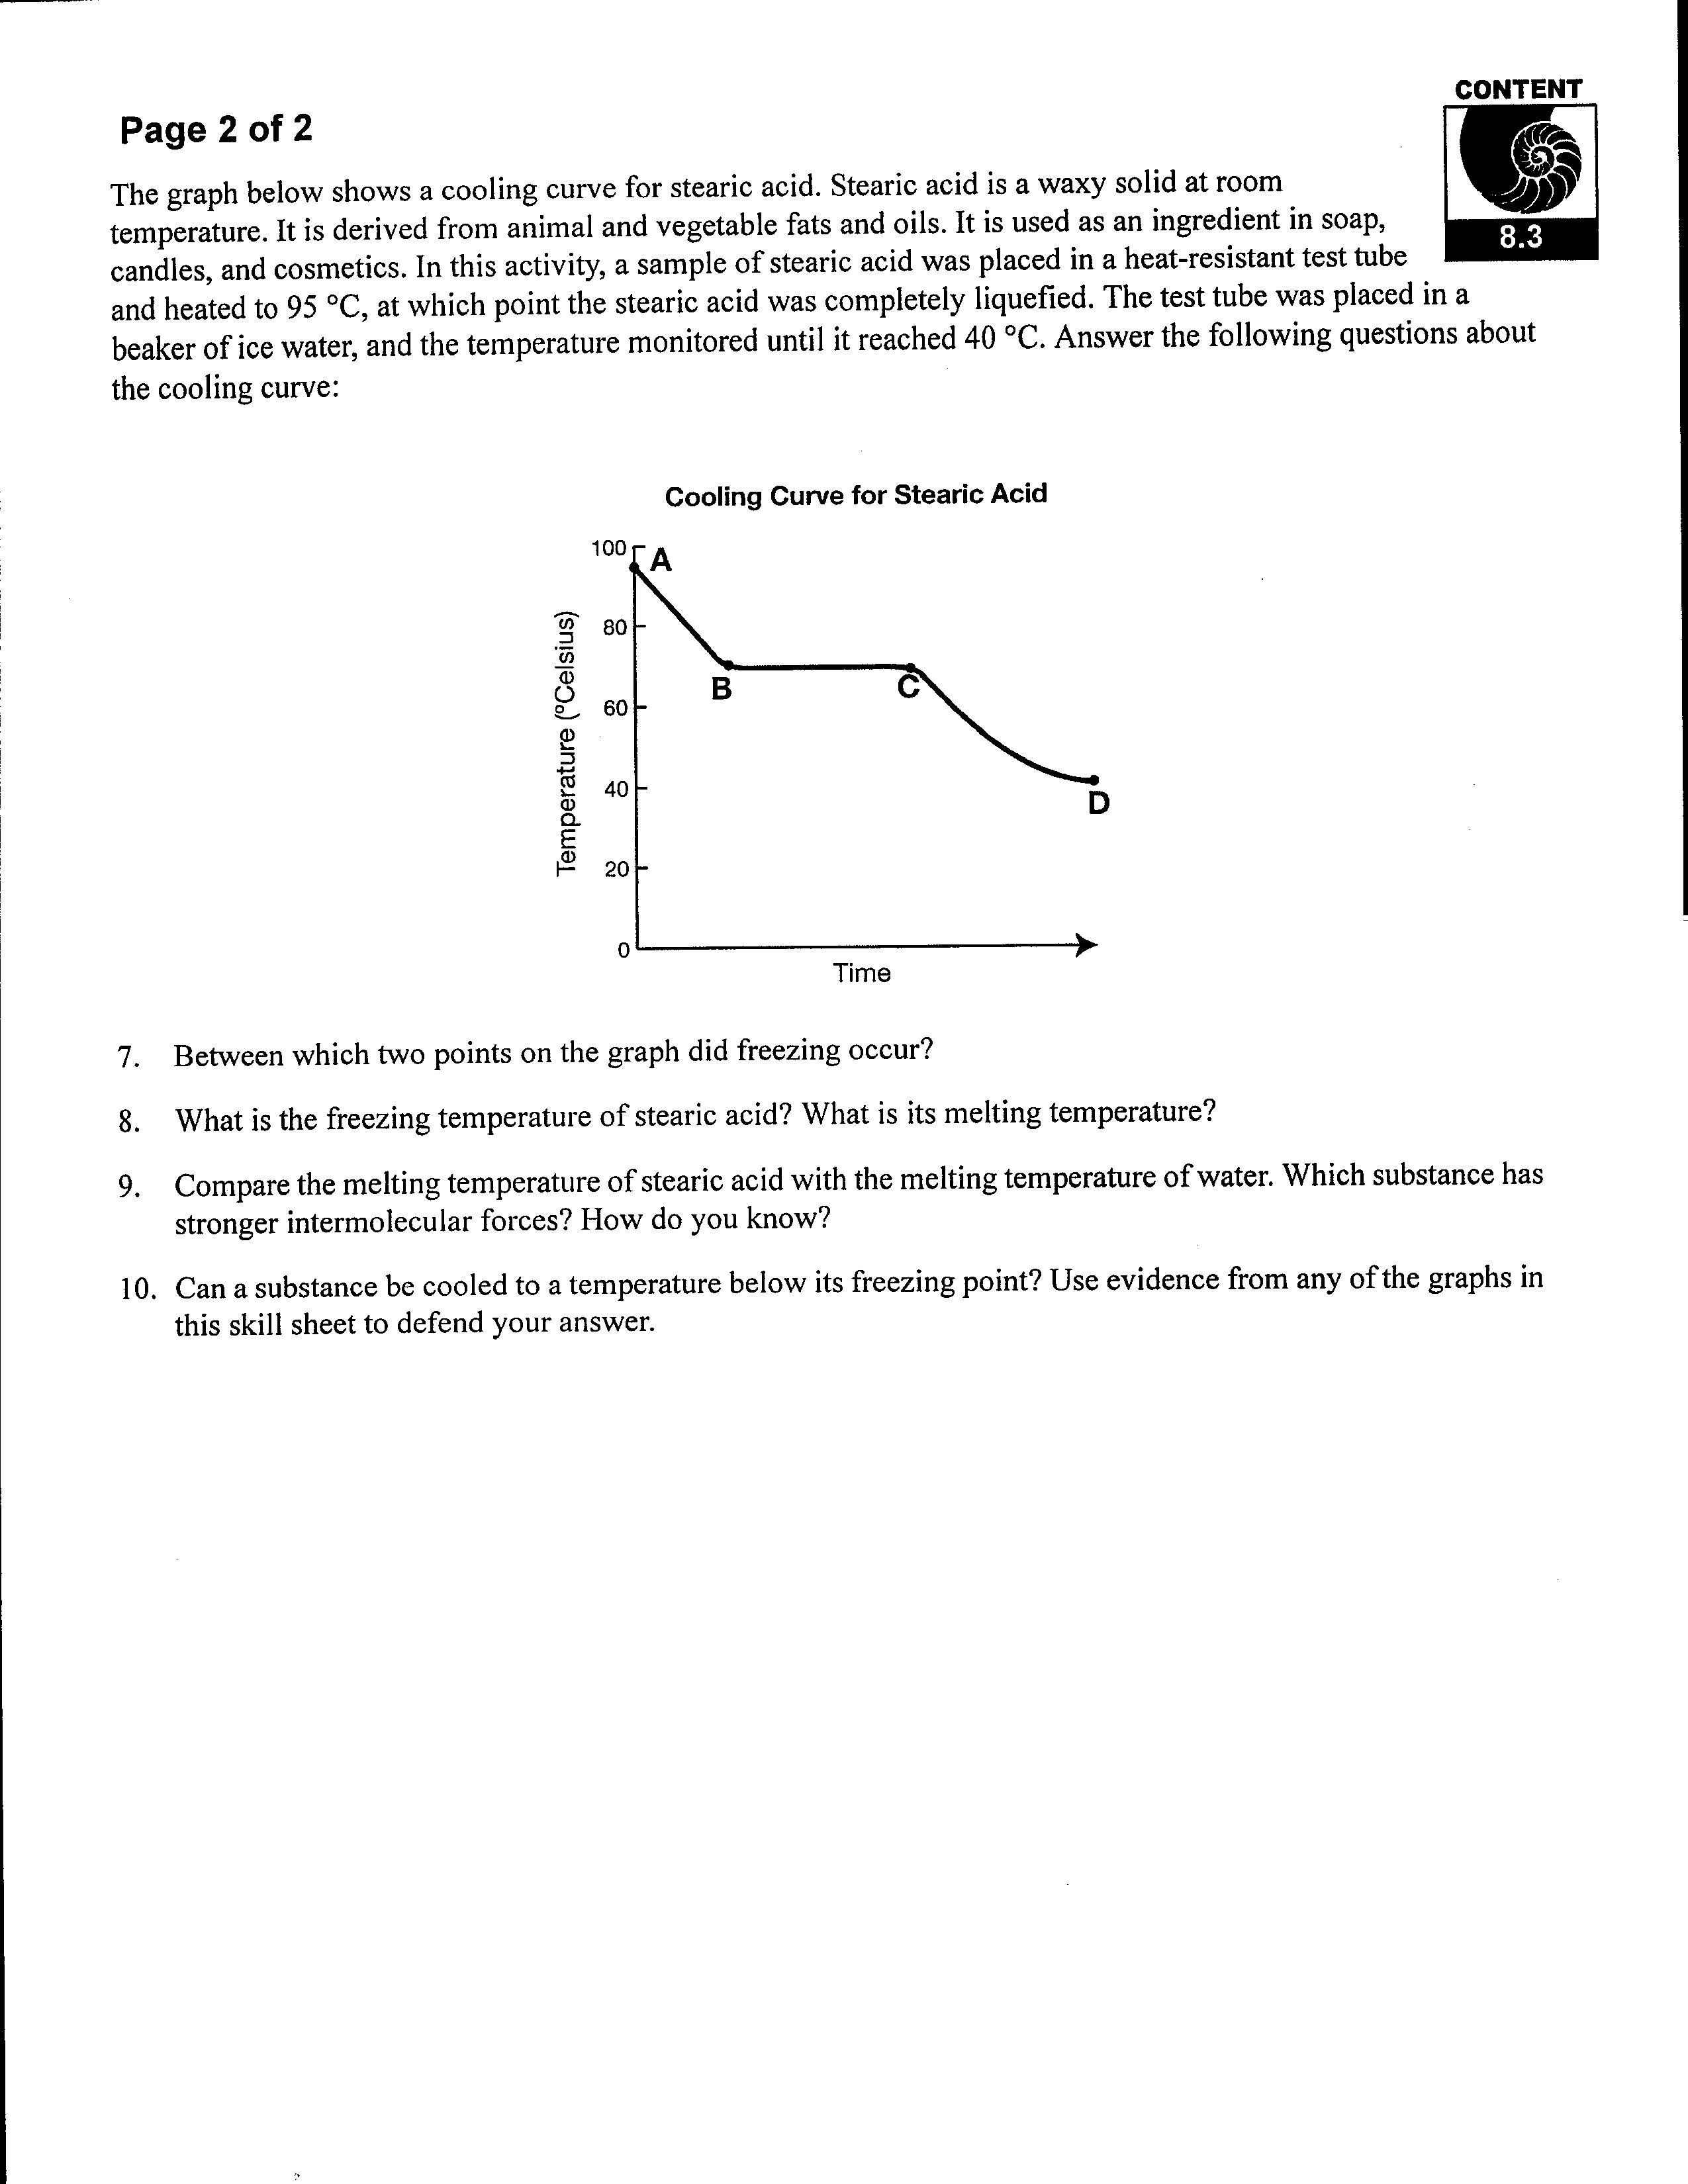 RS Heating: Heating And Cooling Curves Worksheet Intended For Heating Curve Worksheet Answers